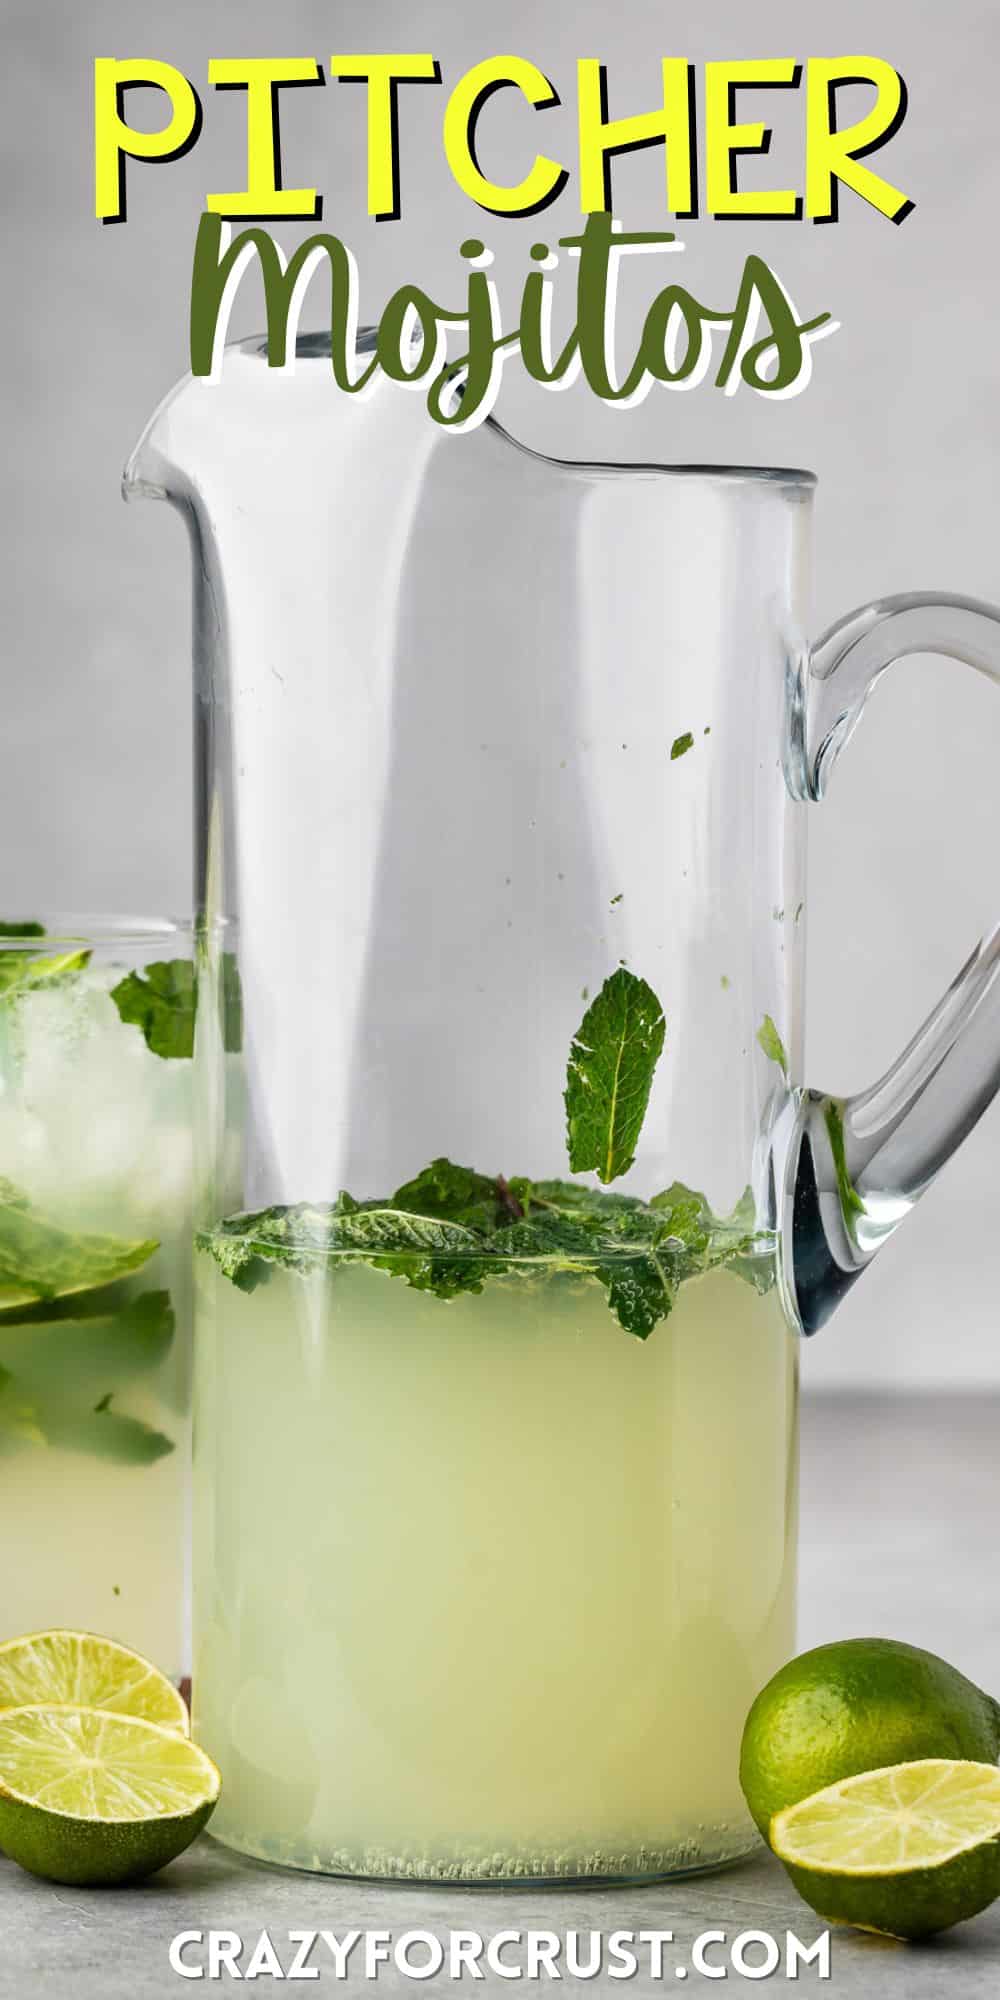 mojito in a tall clear pitcher with sliced limes in and around the glass with mint with words on the image.